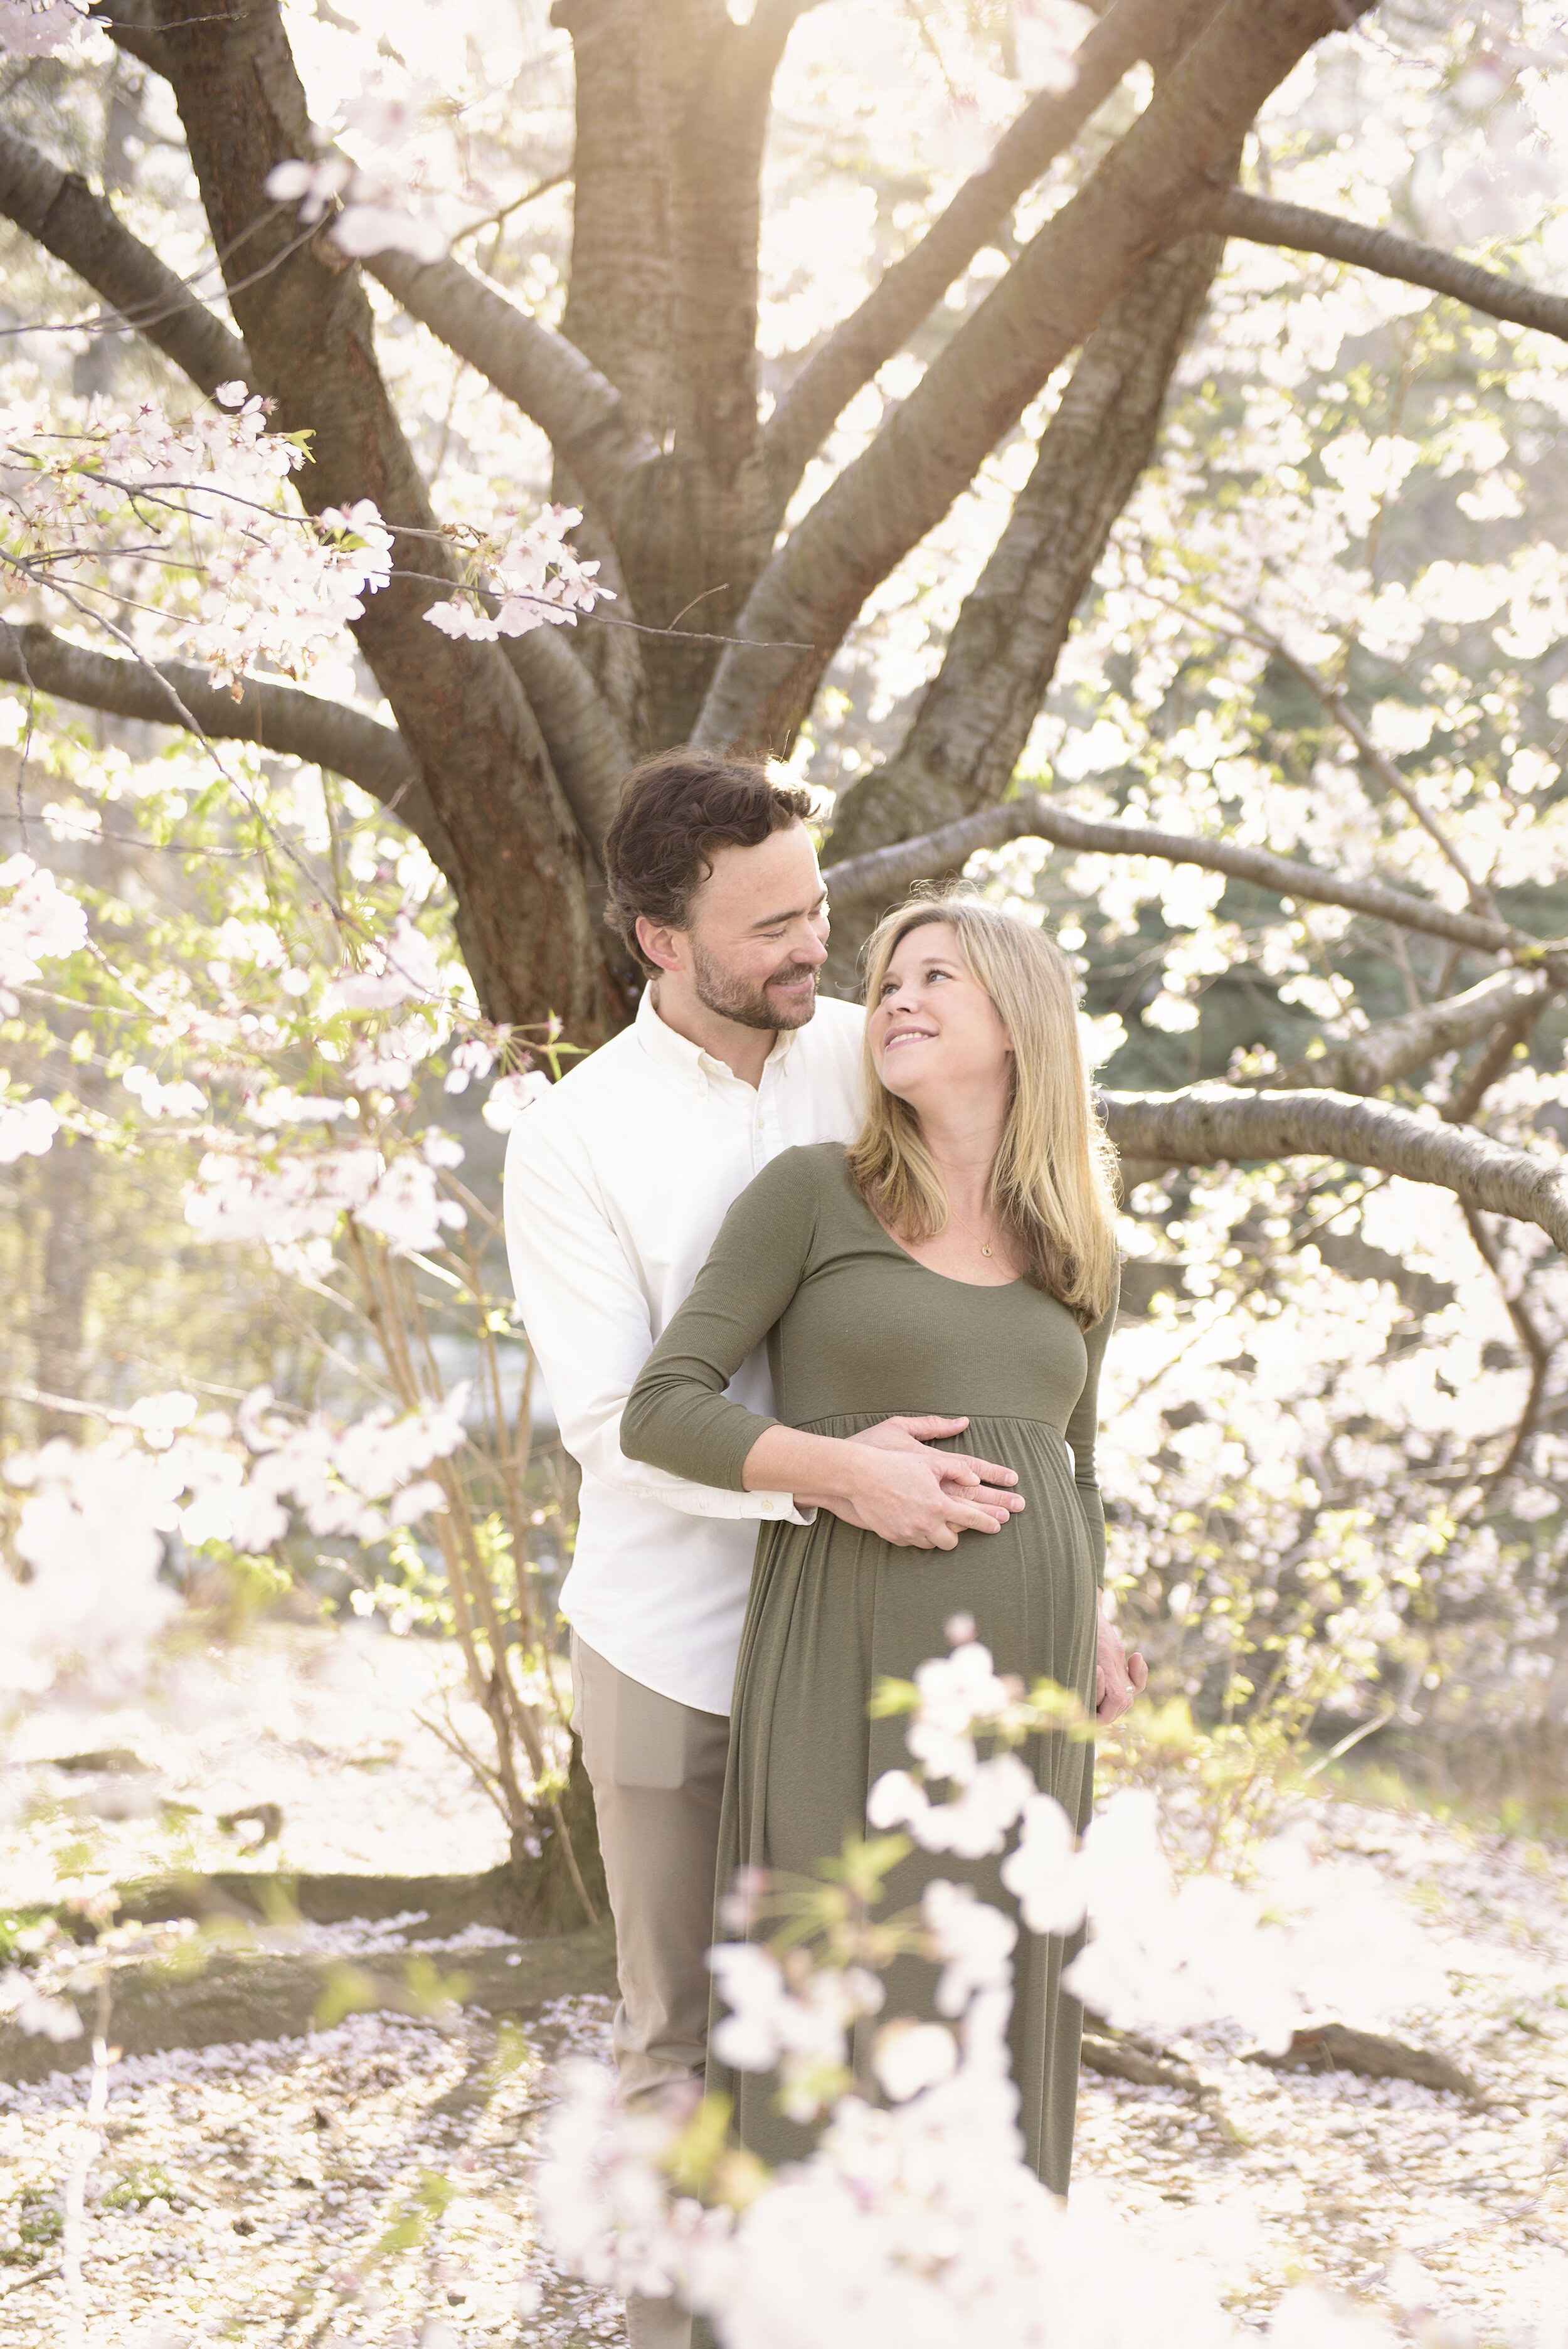 Maternity Photography in Brooklyn, NYC and Beyond